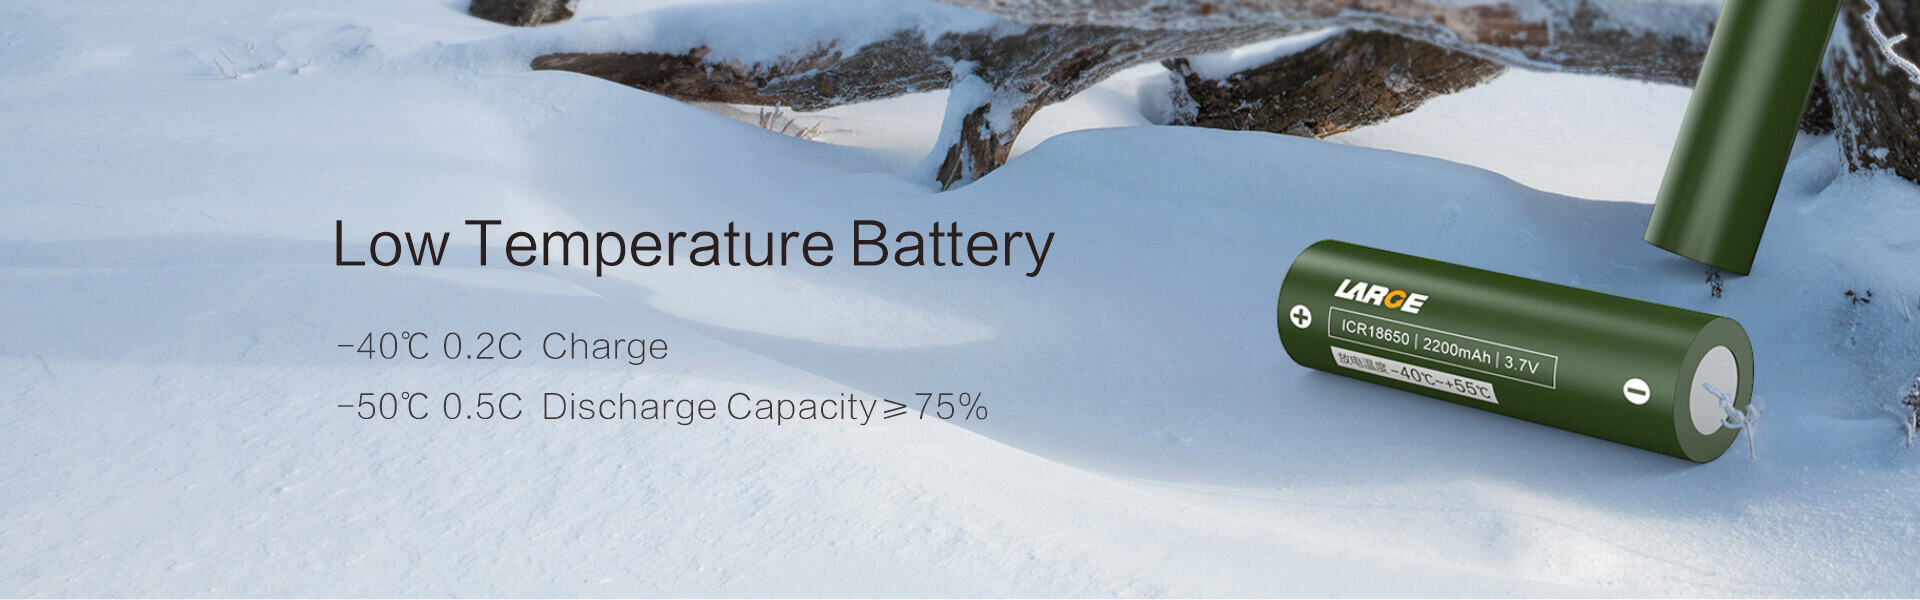 Low-Temperature-Battery